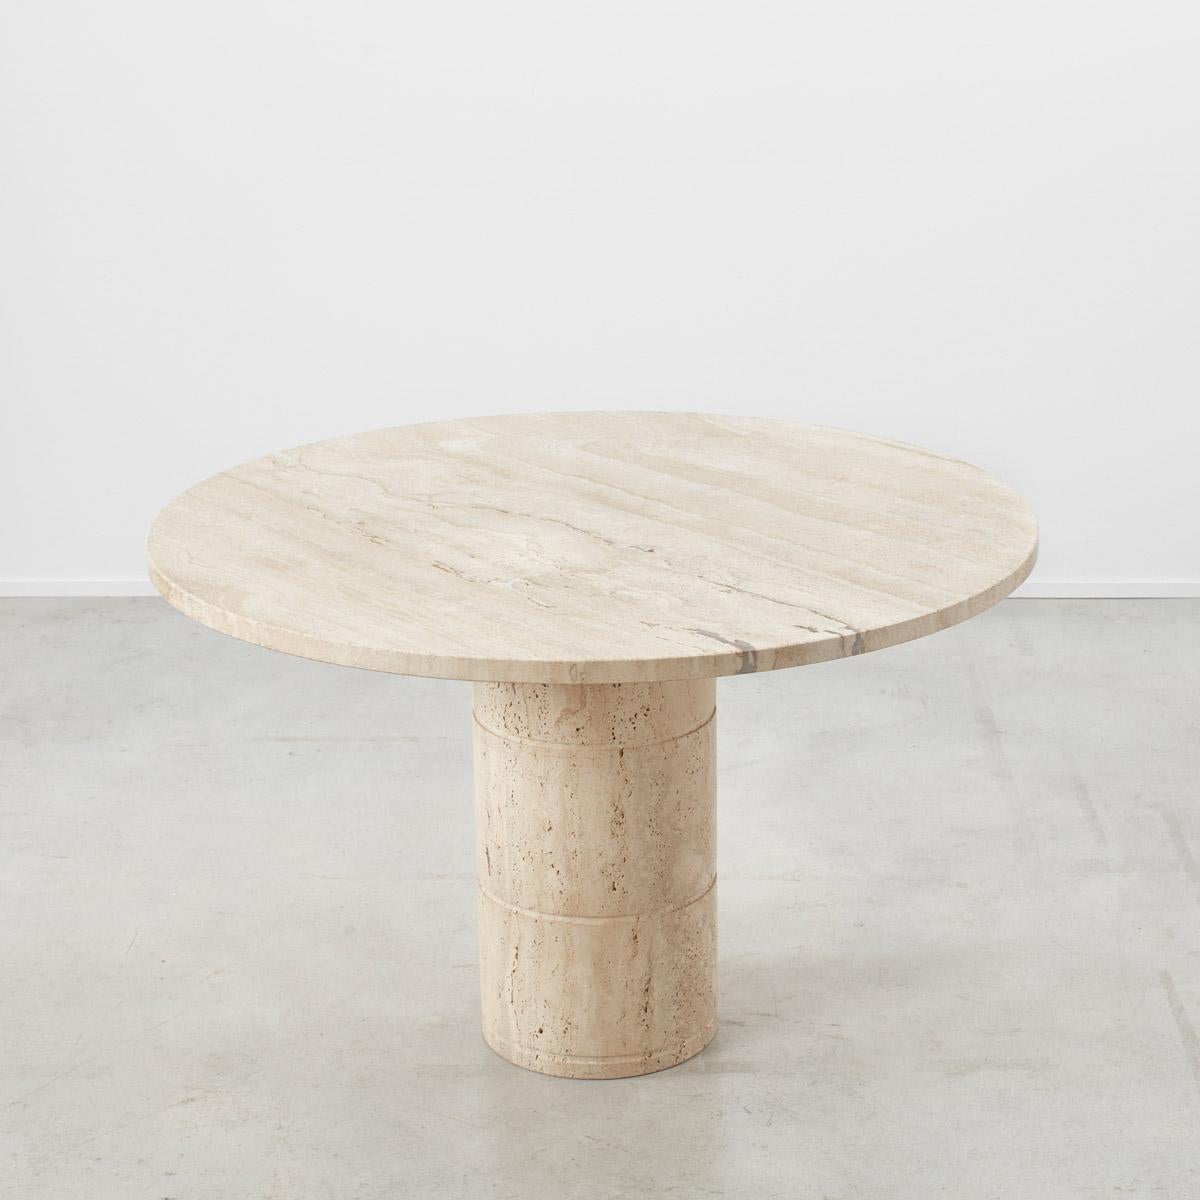 Up&Up hit the scene in 1969. At the foot of the Apuan alps where Michelangelo cut his stone, Up&Up have invited incredible designers Sergio Asti, Ettore Sottsass, Matteo Thun to explore new forms in marble.

This minimal dining table is cut from